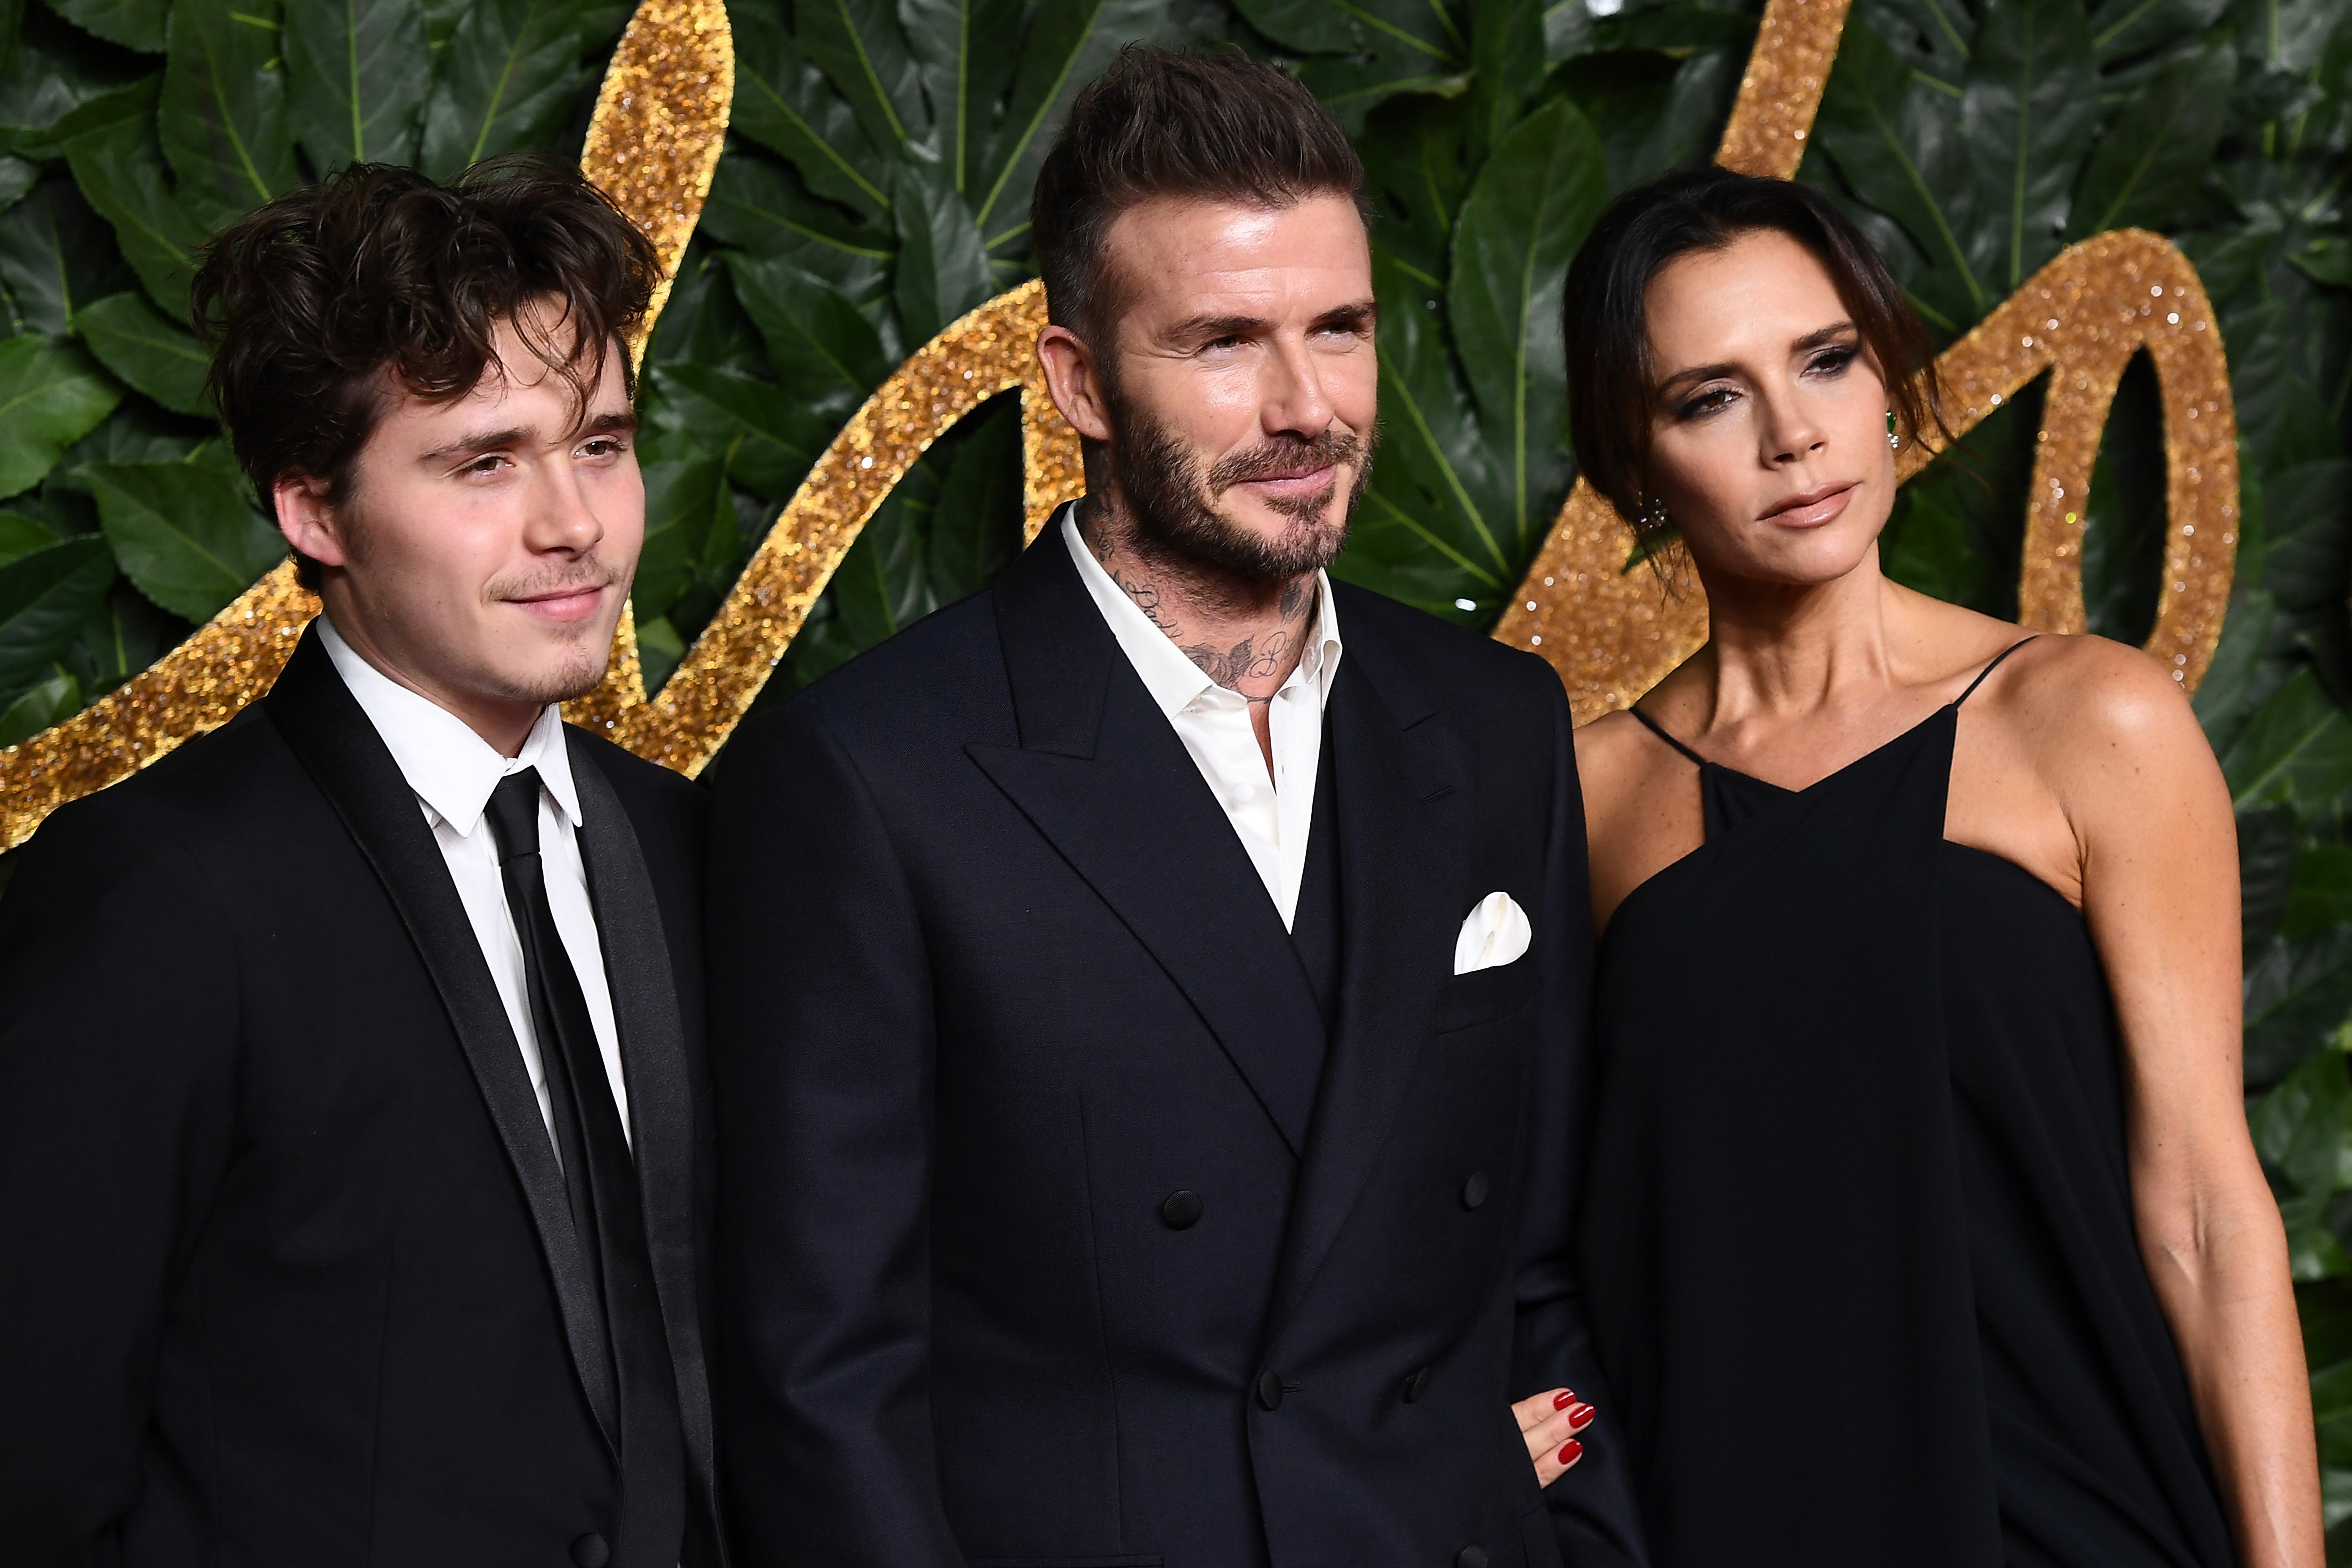 Brooklyn Beckham, David Beckham and Victoria Beckham arrive at The Fashion Awards 2018 In Partnership With Swarovski at Royal Albert Hall on December 10, 2018 in London, England. | Source: Getty Images